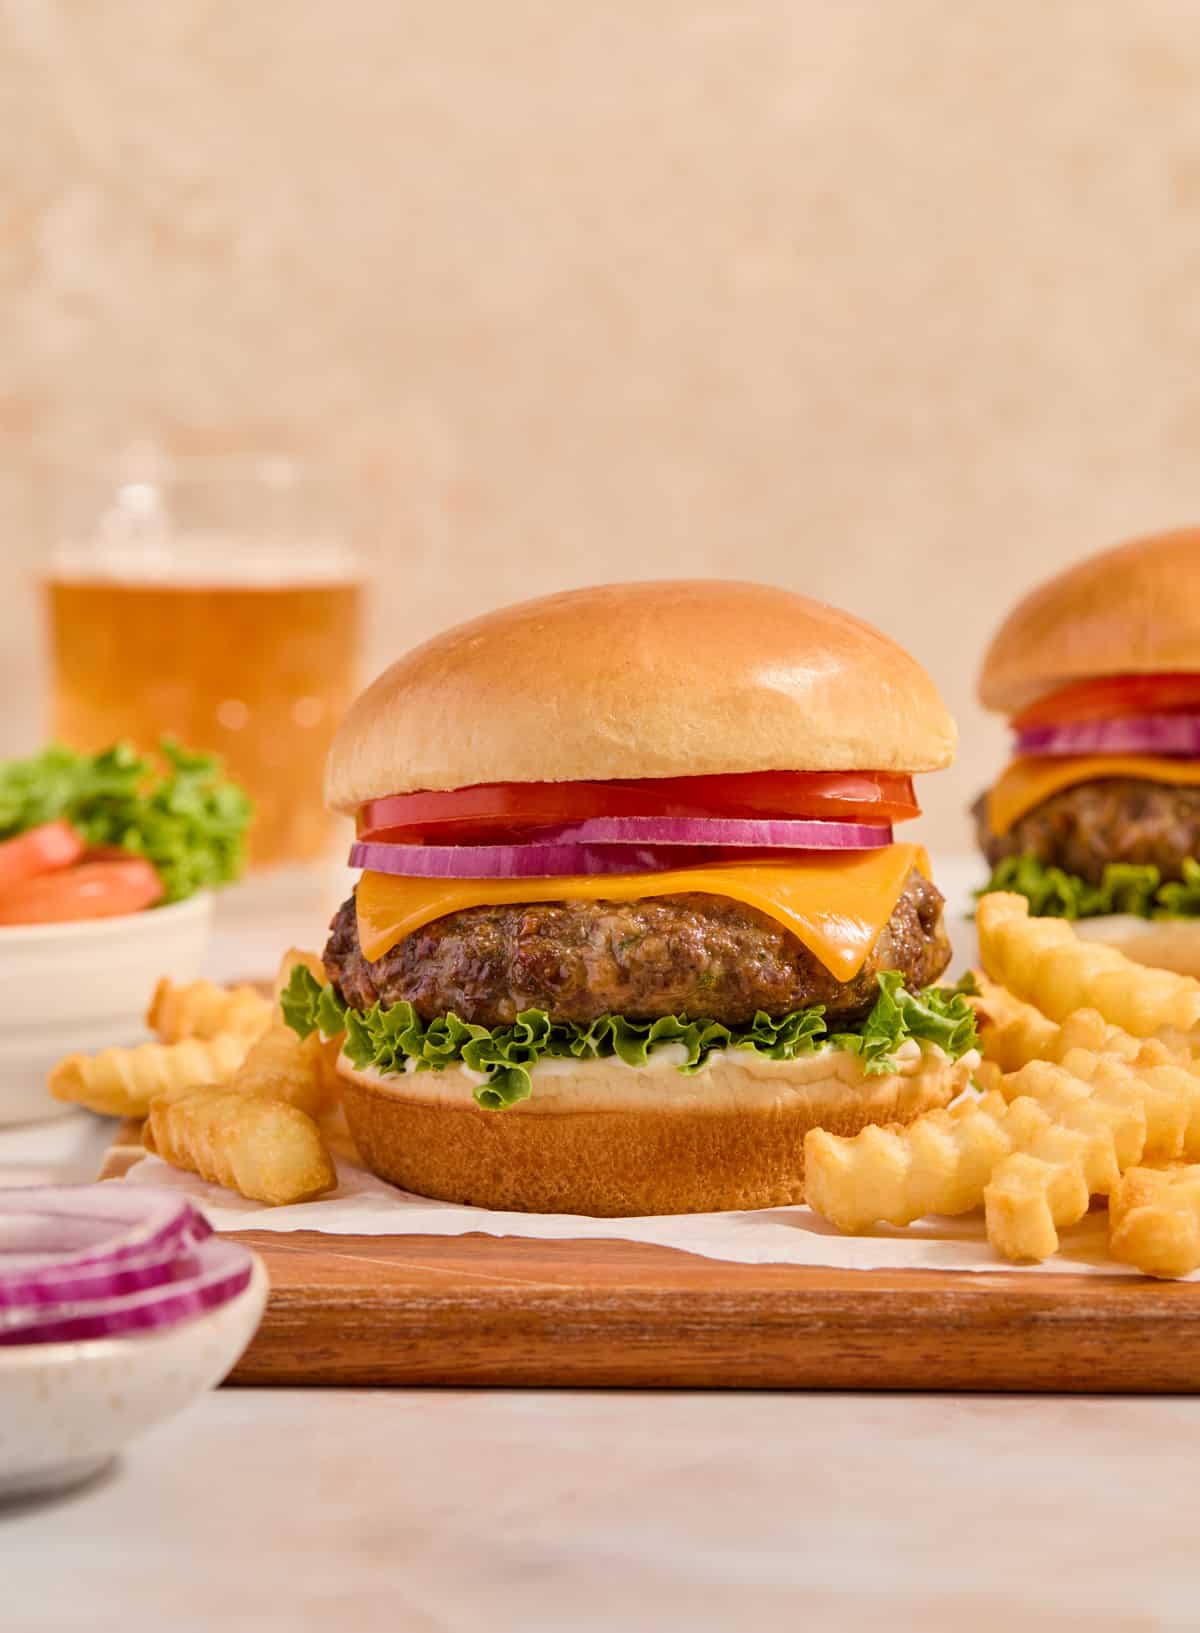 Burger on bun with cheese, lettuce, onion and tomato with beer glass in the background and fries on the platter.